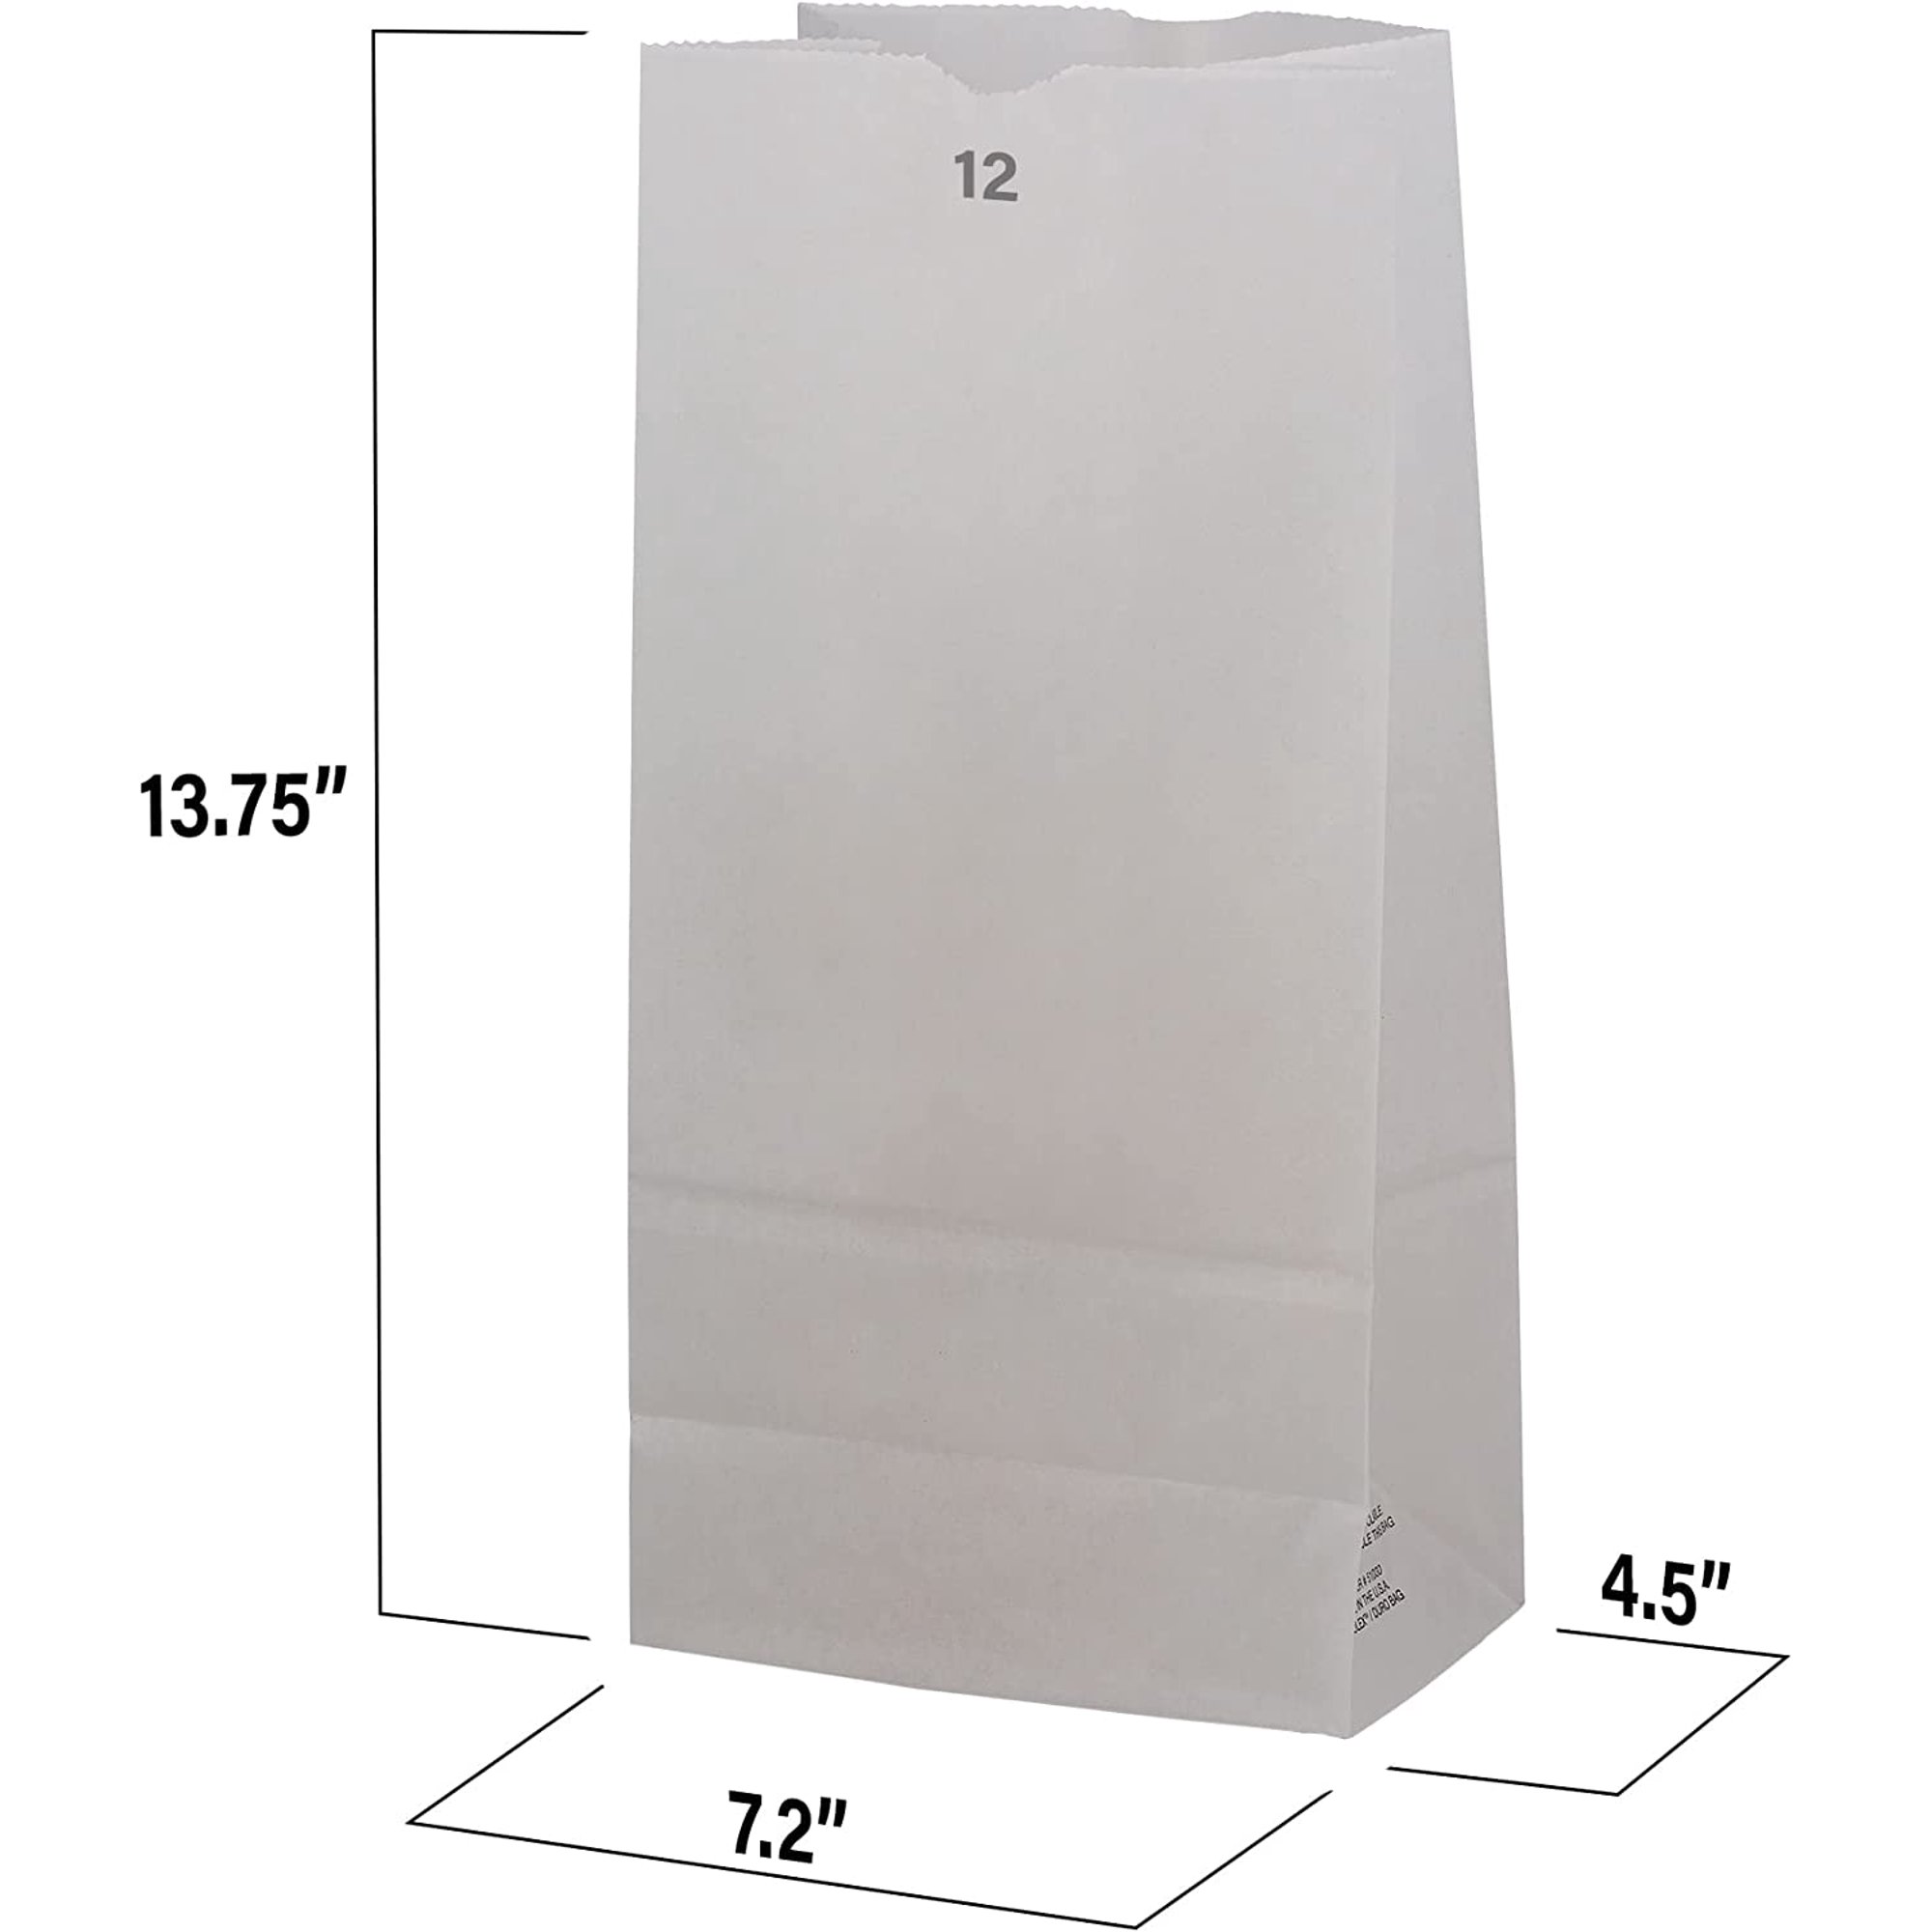 Paper Lunch Bags 50 Count Large White Lunch Bags Kraft White Paper Bag